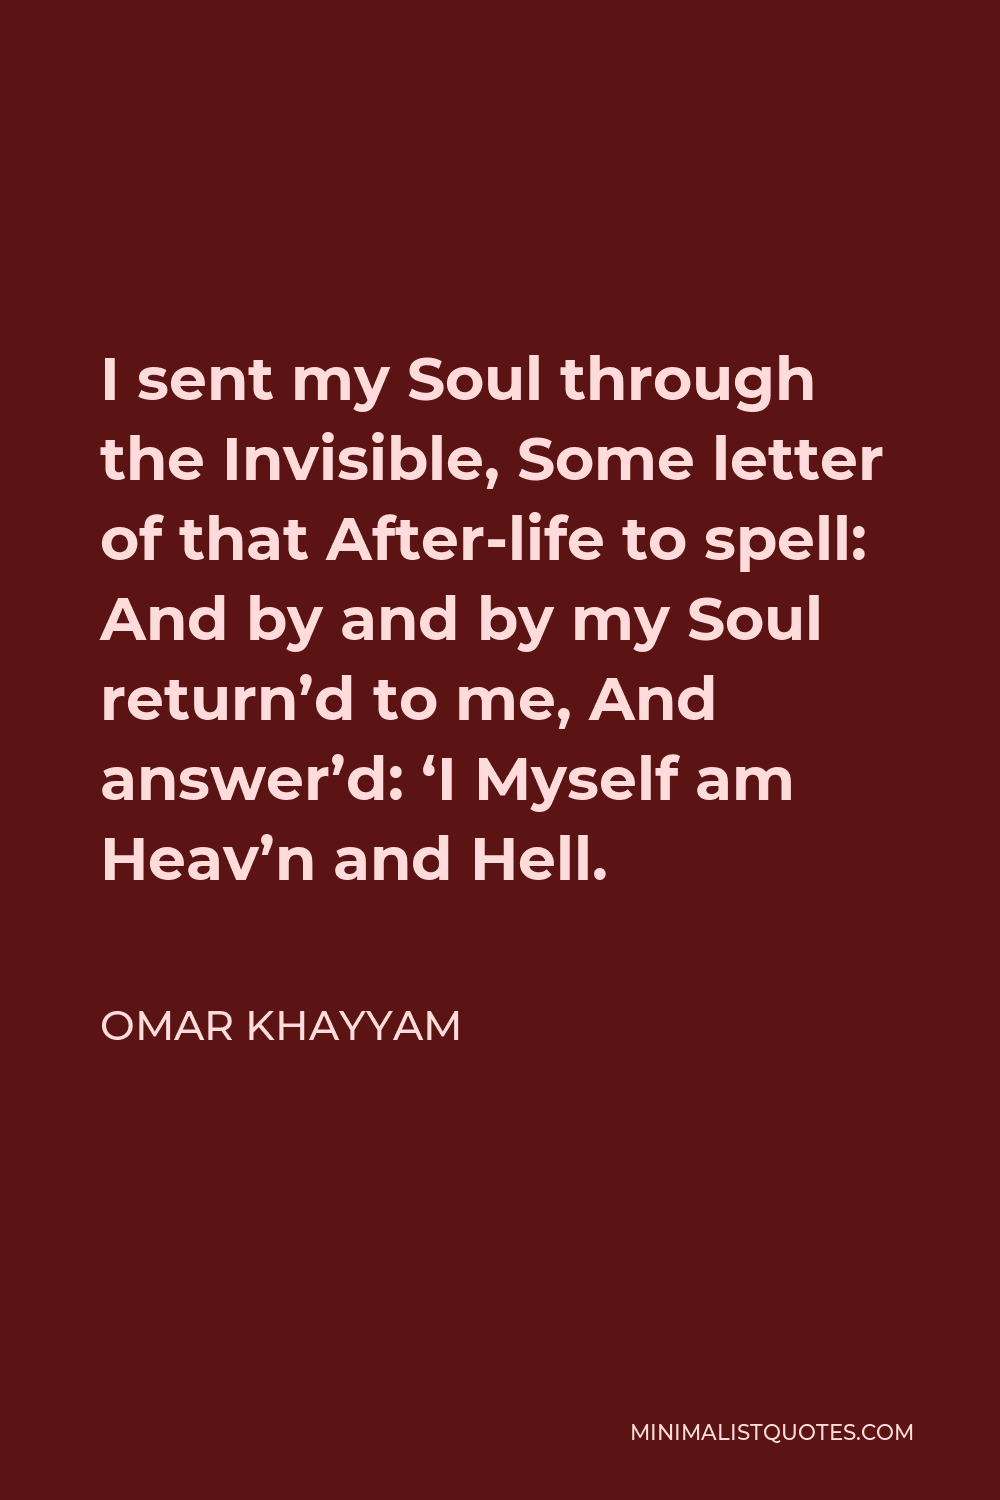 Omar Khayyam Quote - I sent my Soul through the Invisible, Some letter of that After-life to spell: And by and by my Soul return’d to me, And answer’d: ‘I Myself am Heav’n and Hell.